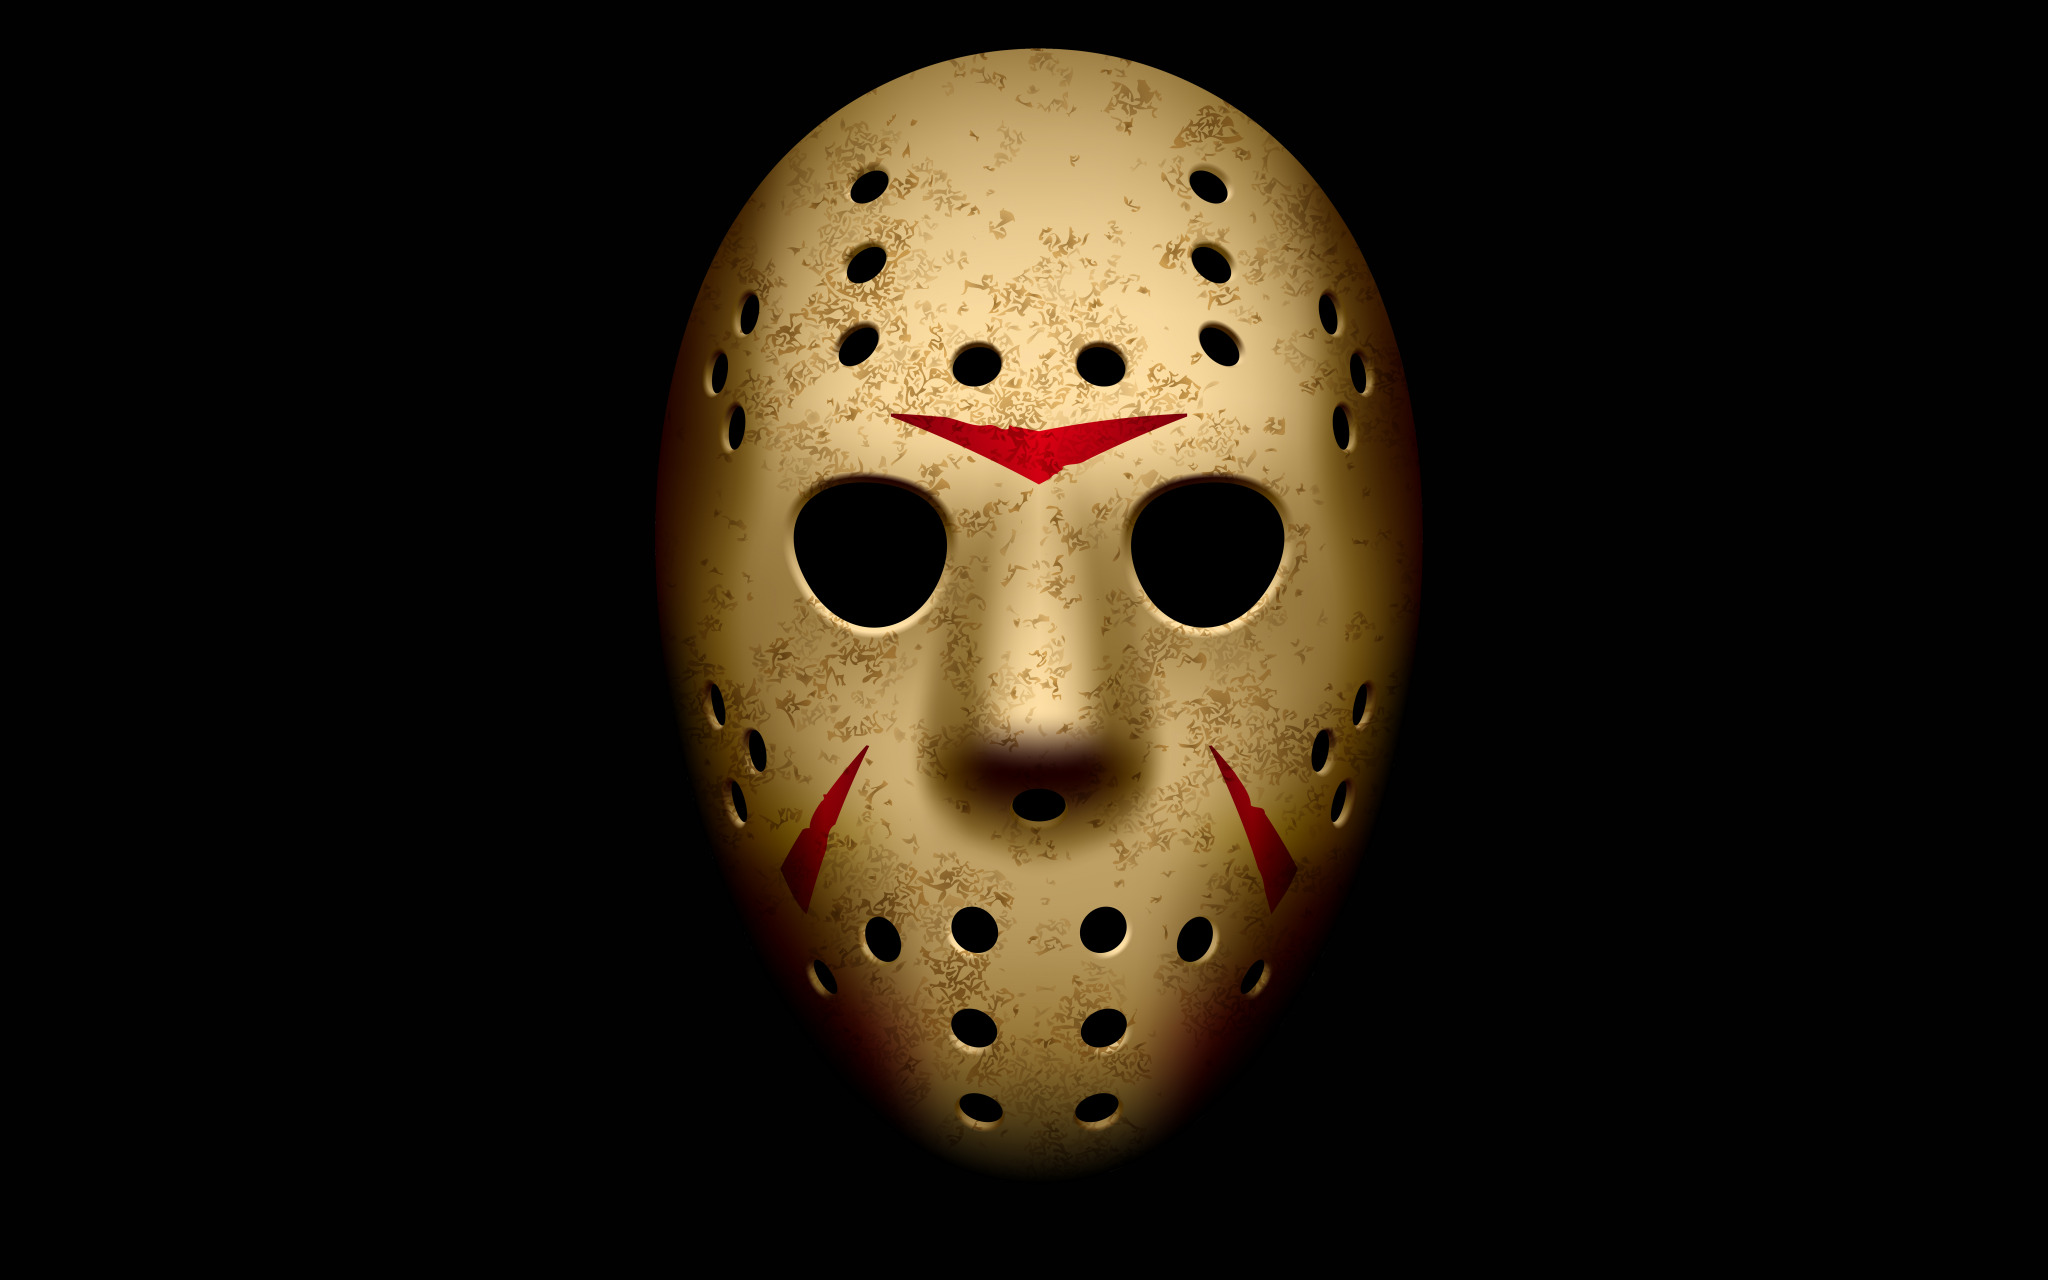 General 2048x1280 black background Jason Voorhees Friday the 13th mask movie characters simple background digital art